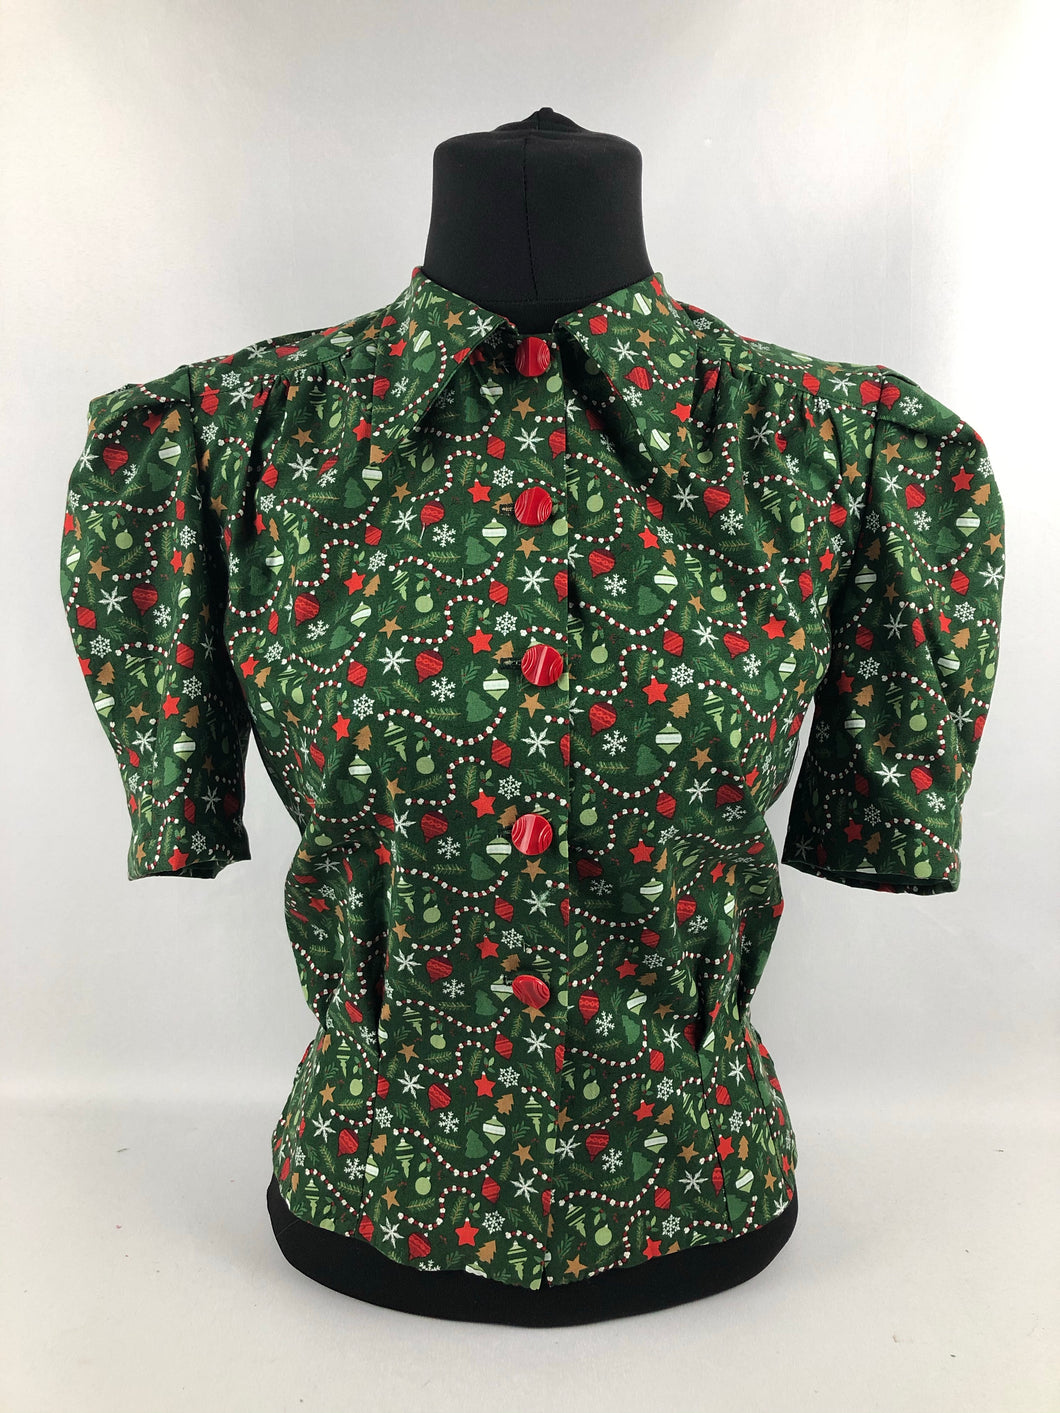 1940s Reproduction Christmas Blouse in Riley Blake Cotton - Bust 34